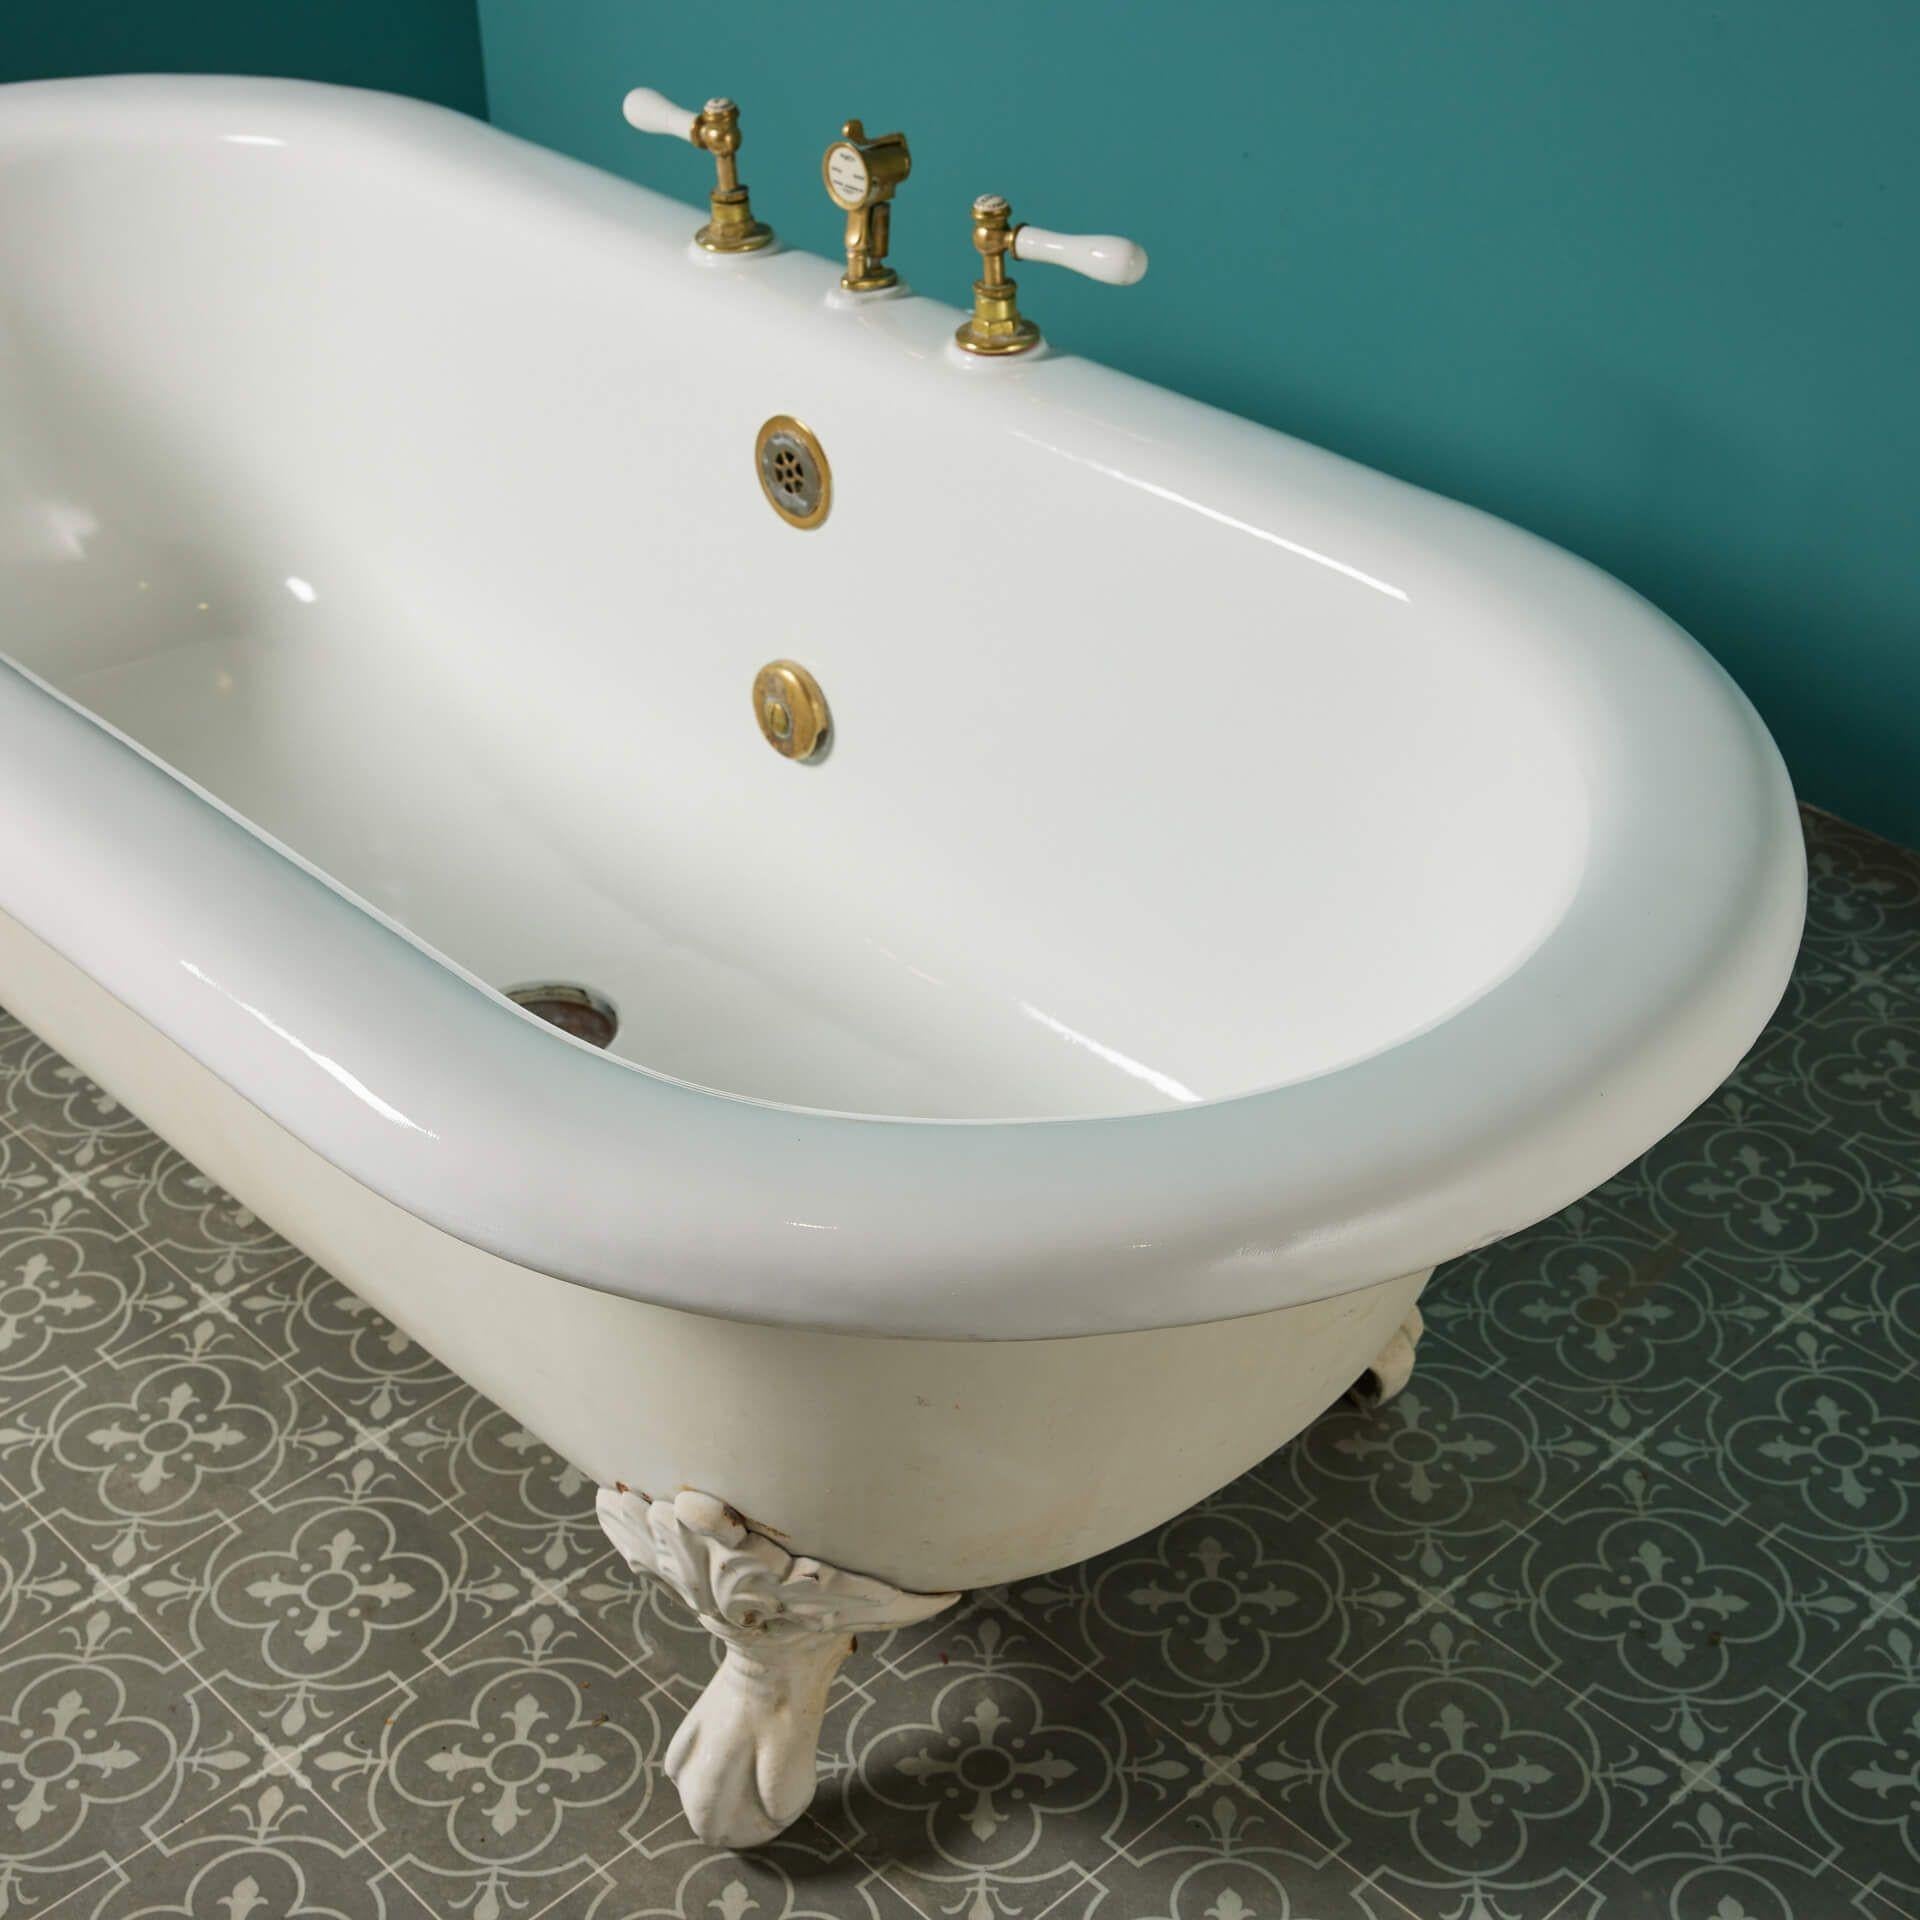 Antique Double Ended Bathtub with Ball and Claw Feet by George Jennings In Fair Condition For Sale In Wormelow, Herefordshire